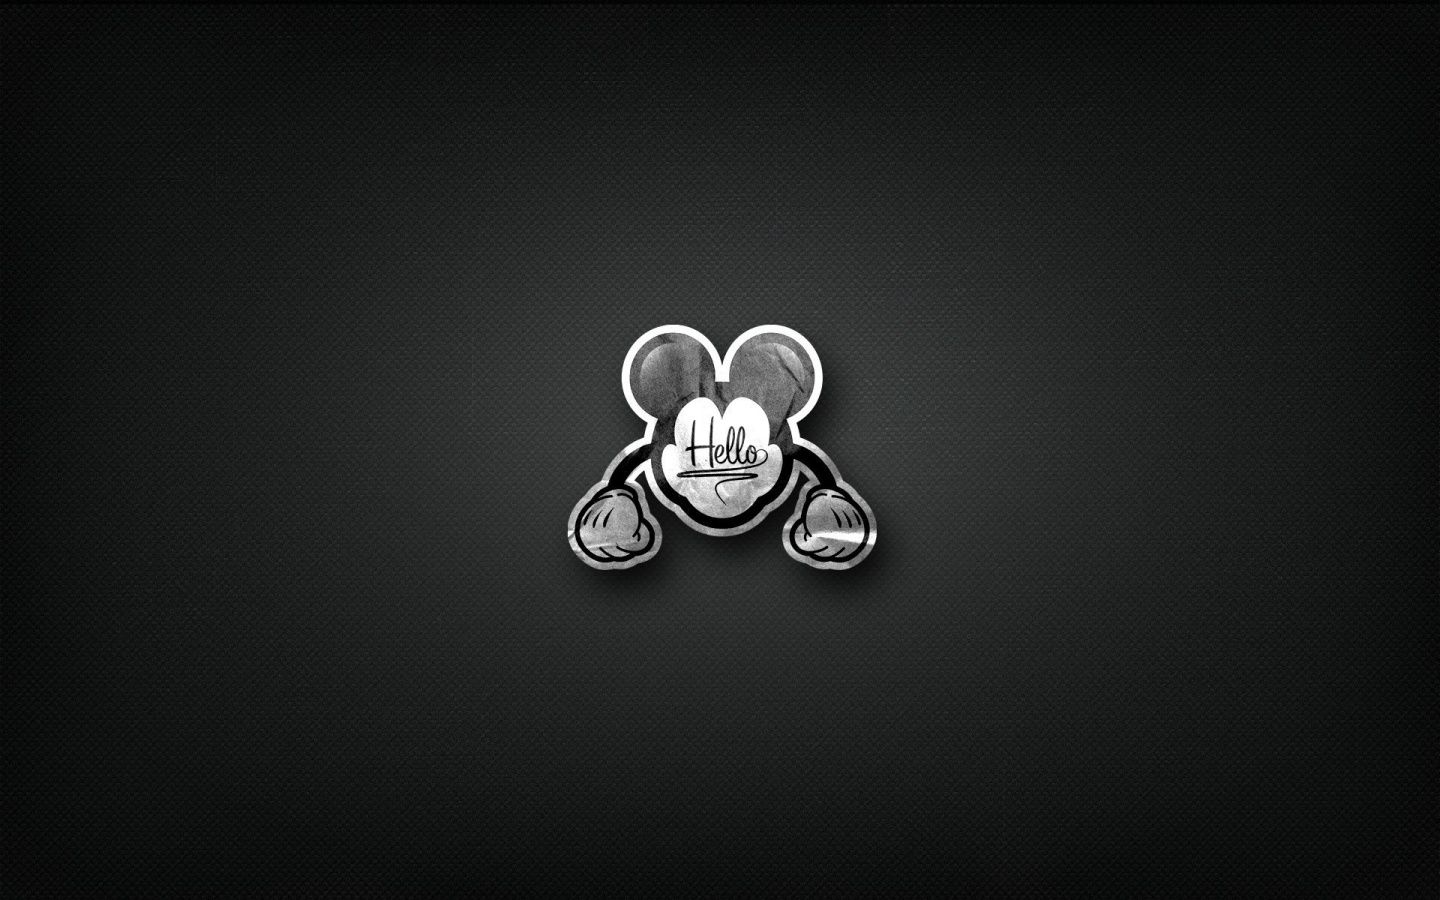 Mickey Mouse Minimalist Wallpapers - 1440x900 - 416147